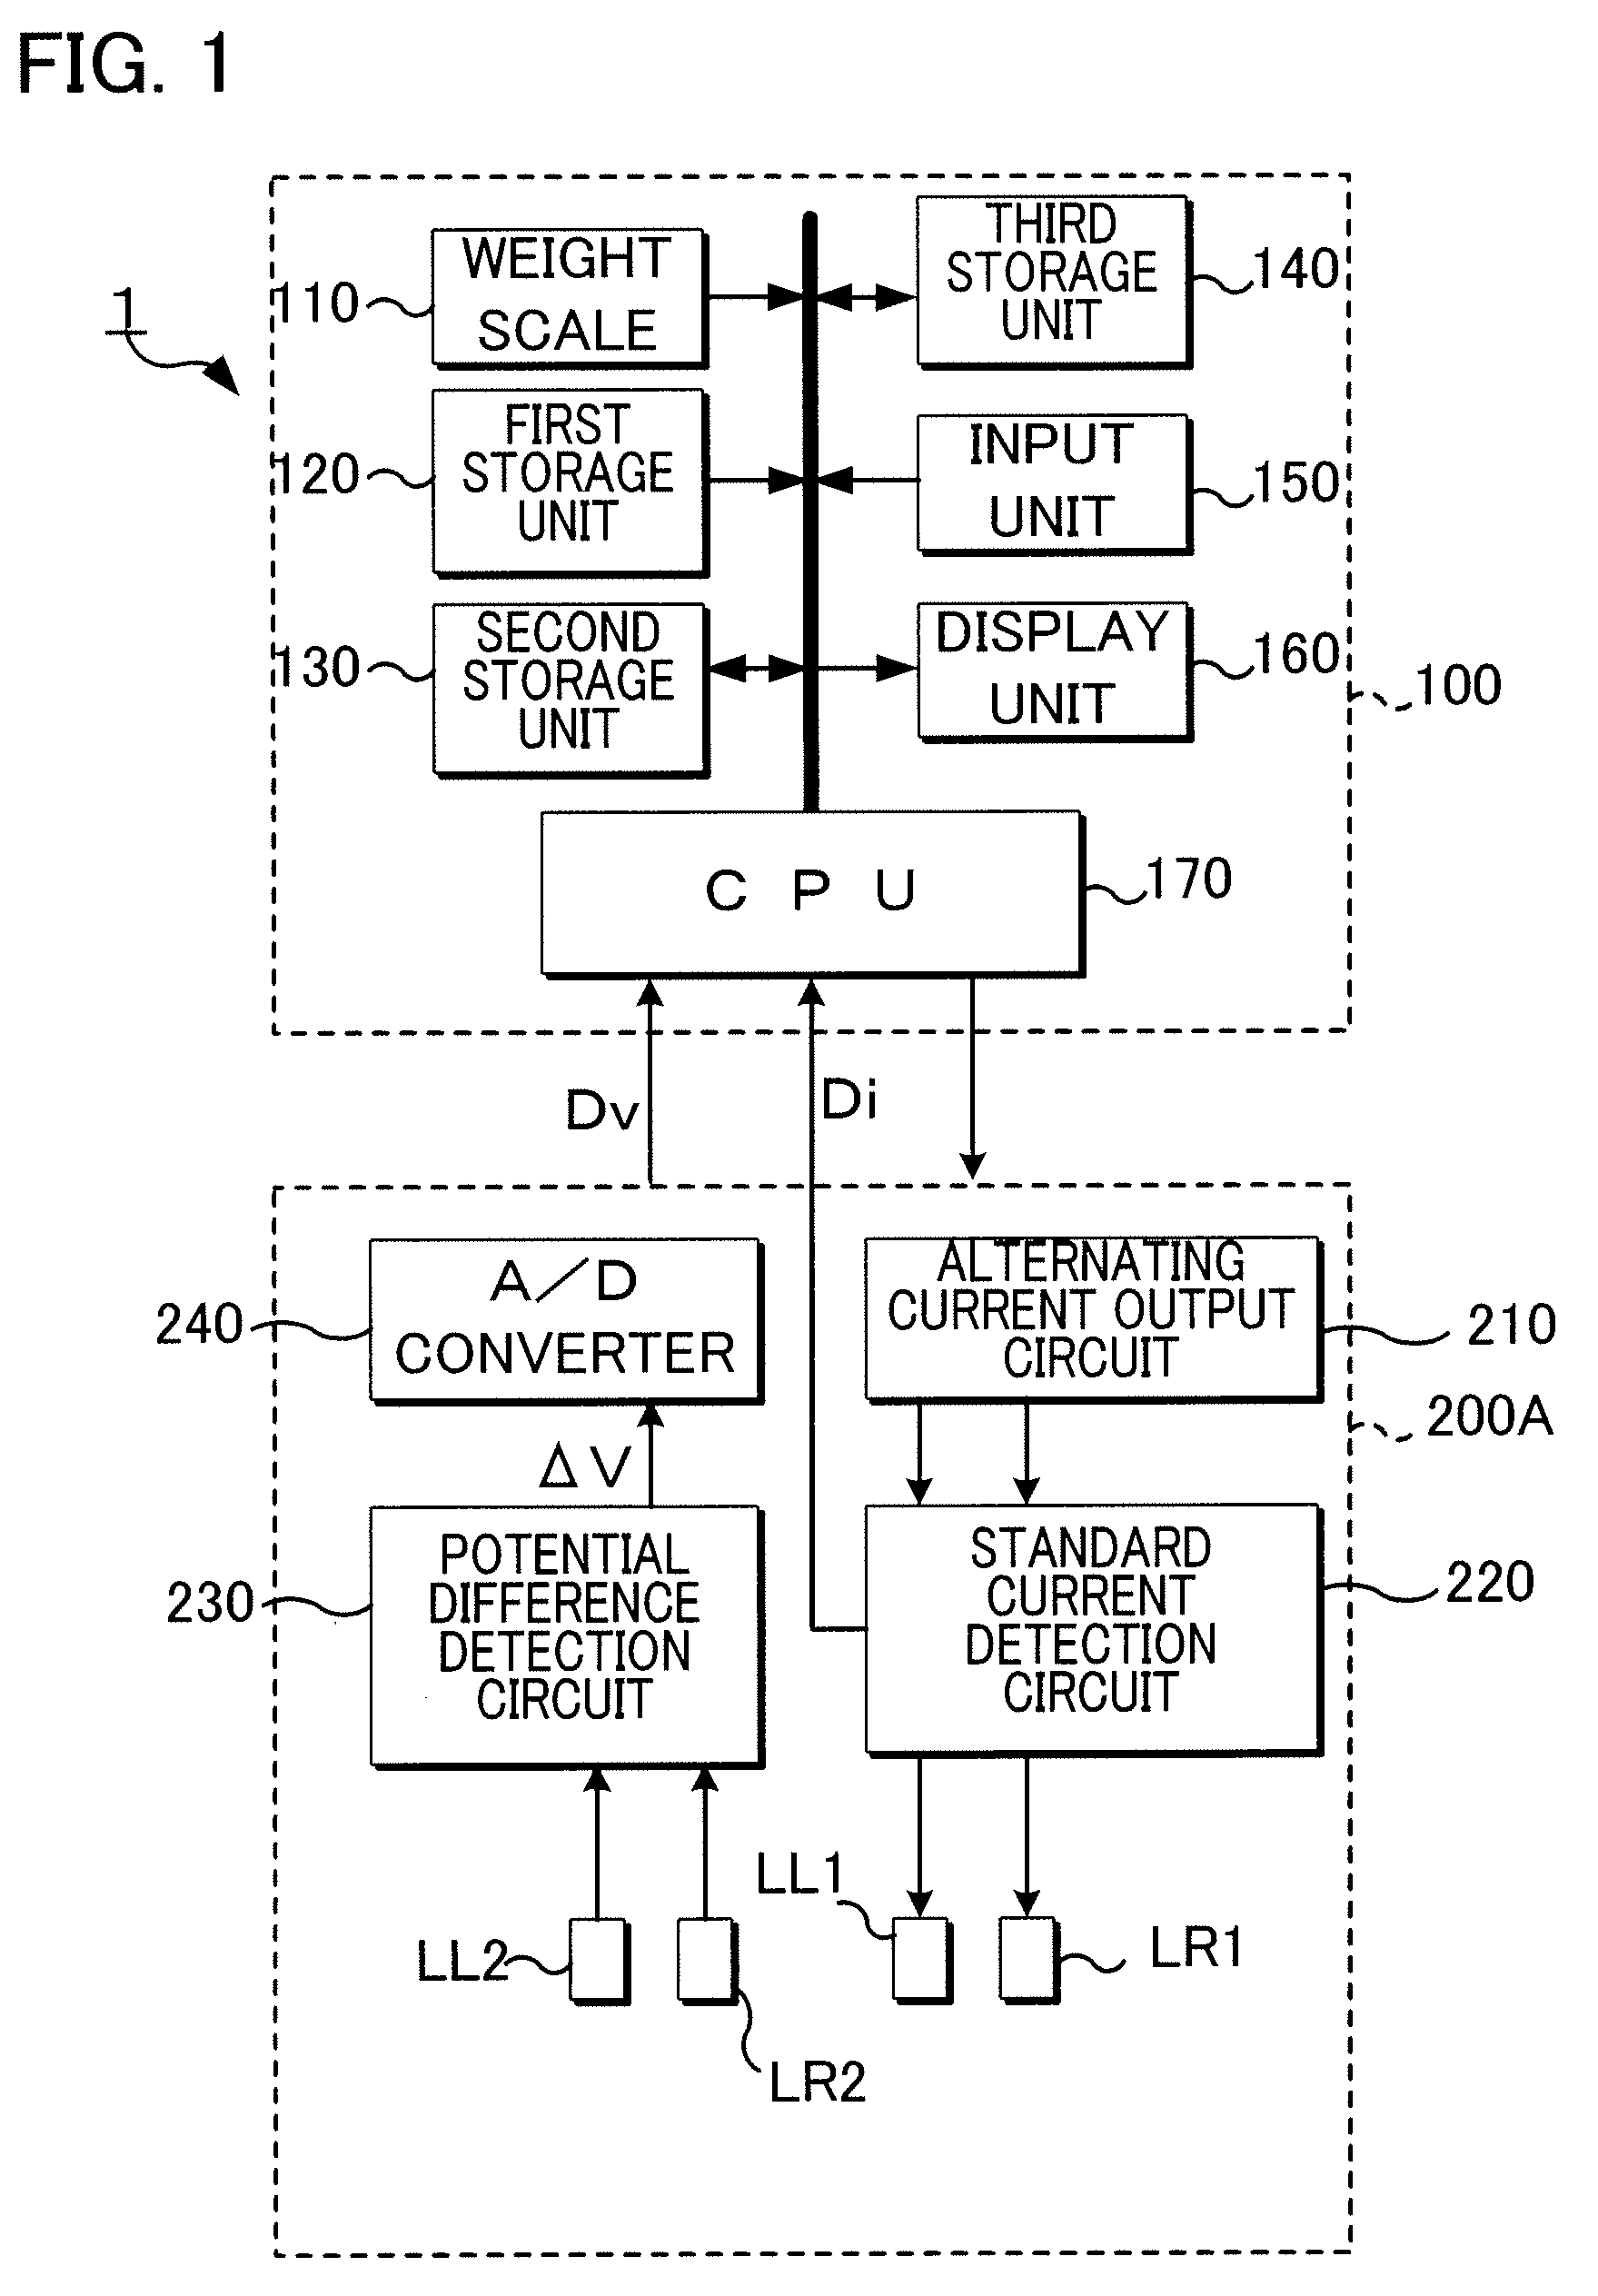 Human Subject Index Estimation Apparatus and Method